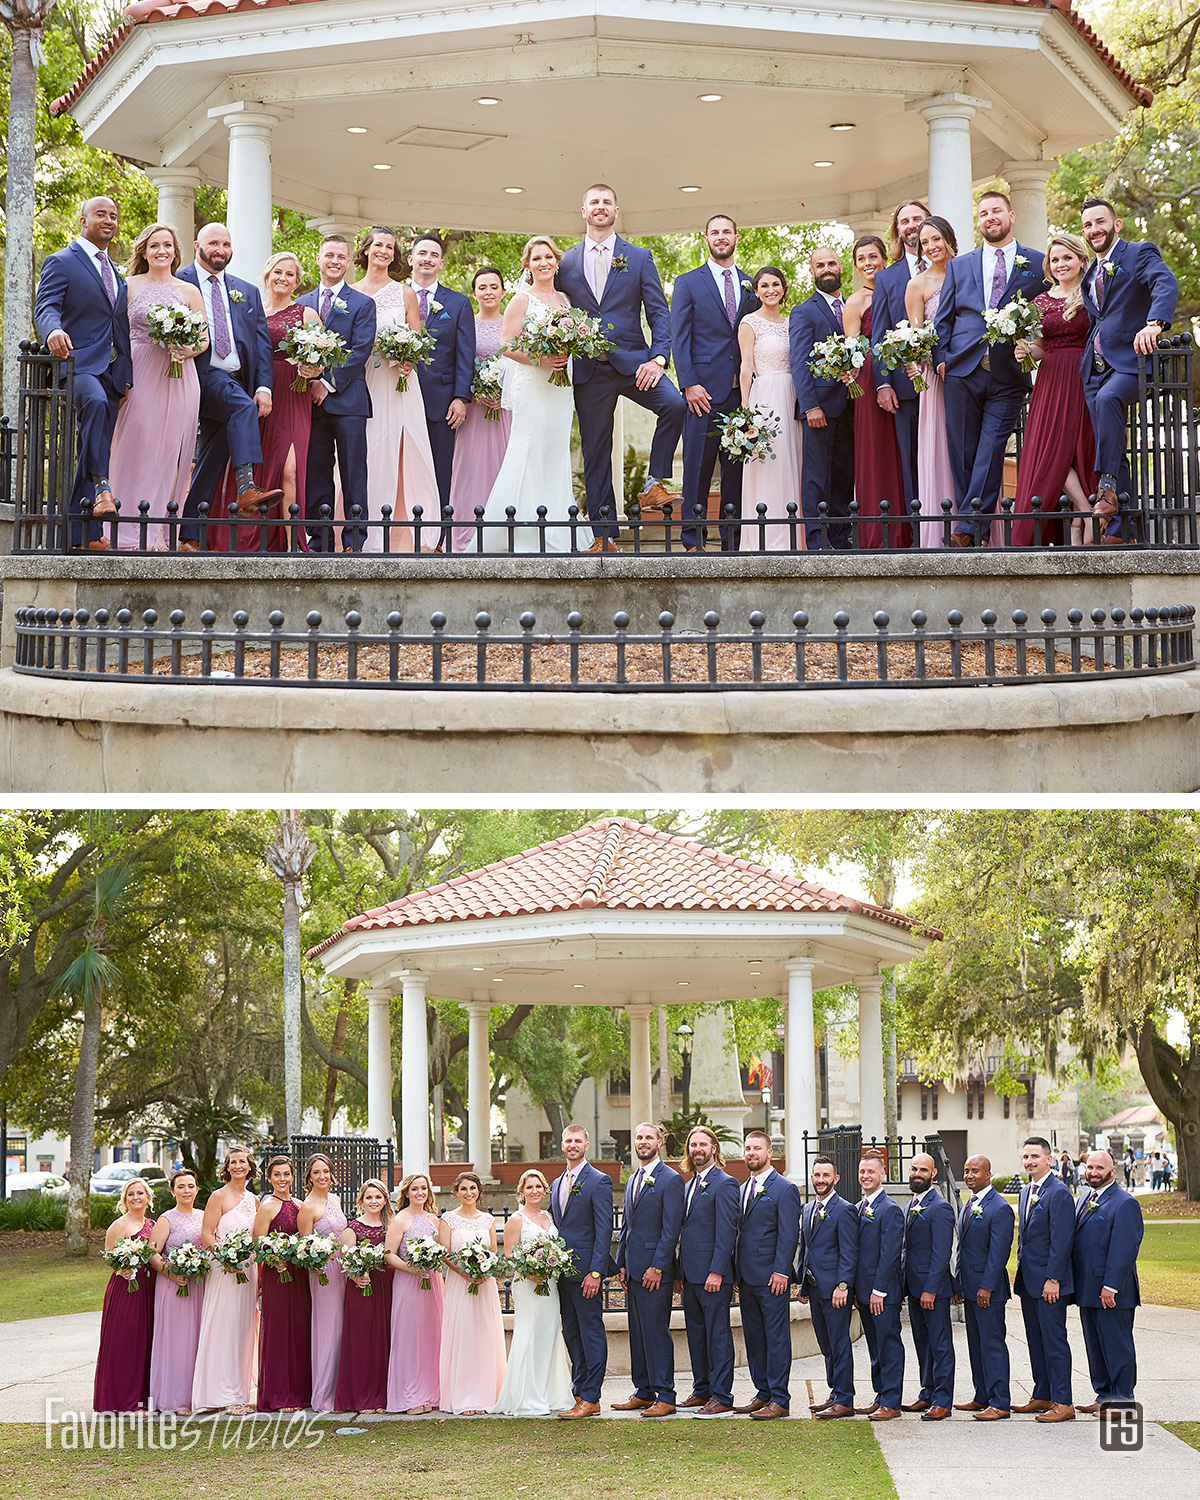 Downtown St. Augustine Posed Pictures of Bridal Party